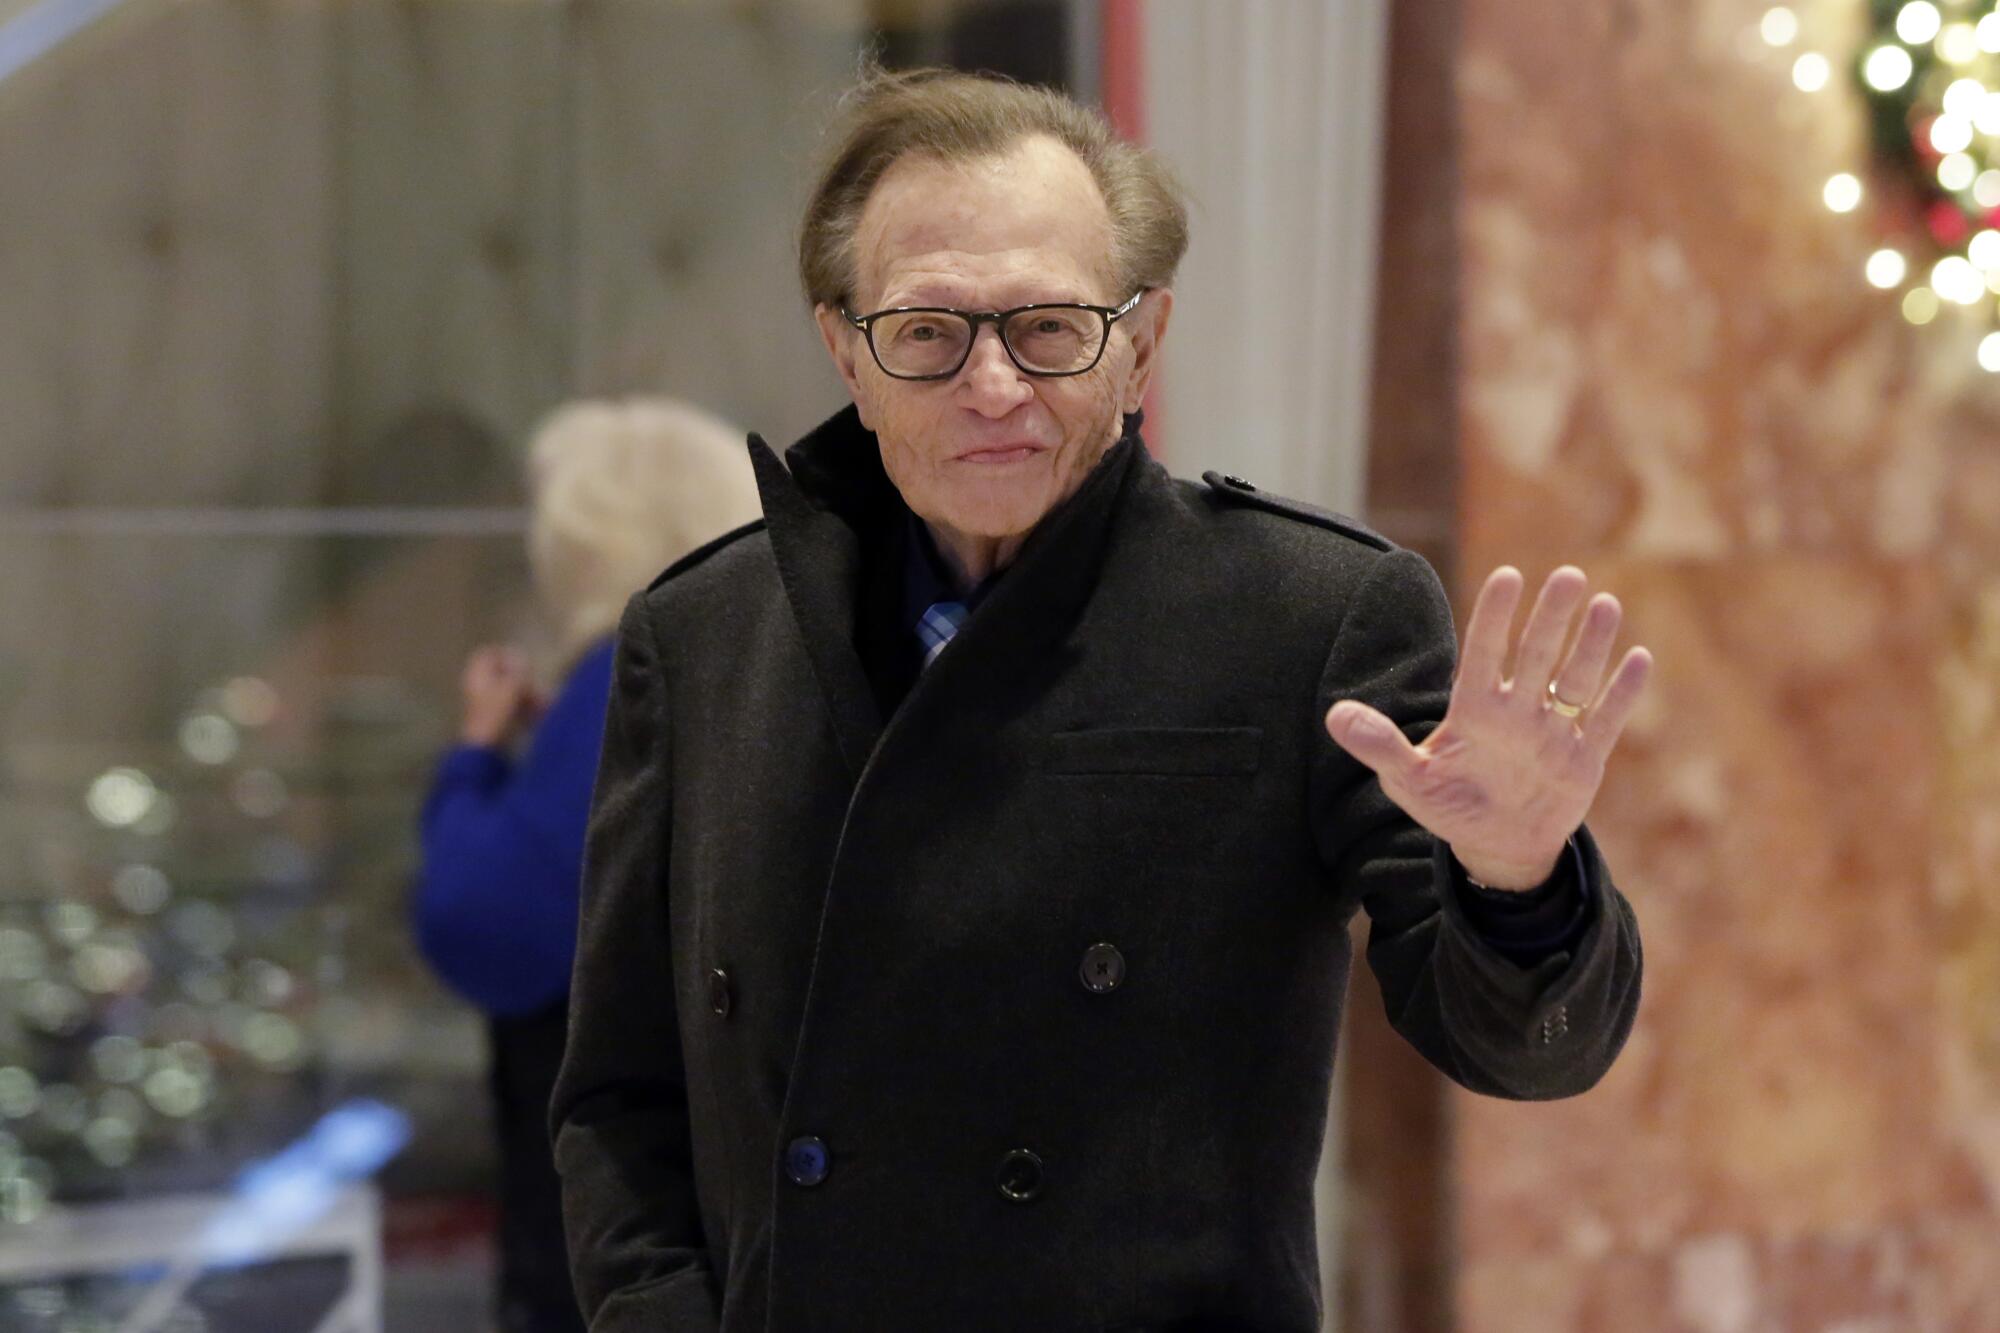 Larry King waves while arriving at Trump Tower in New York on  Dec. 1, 2016.